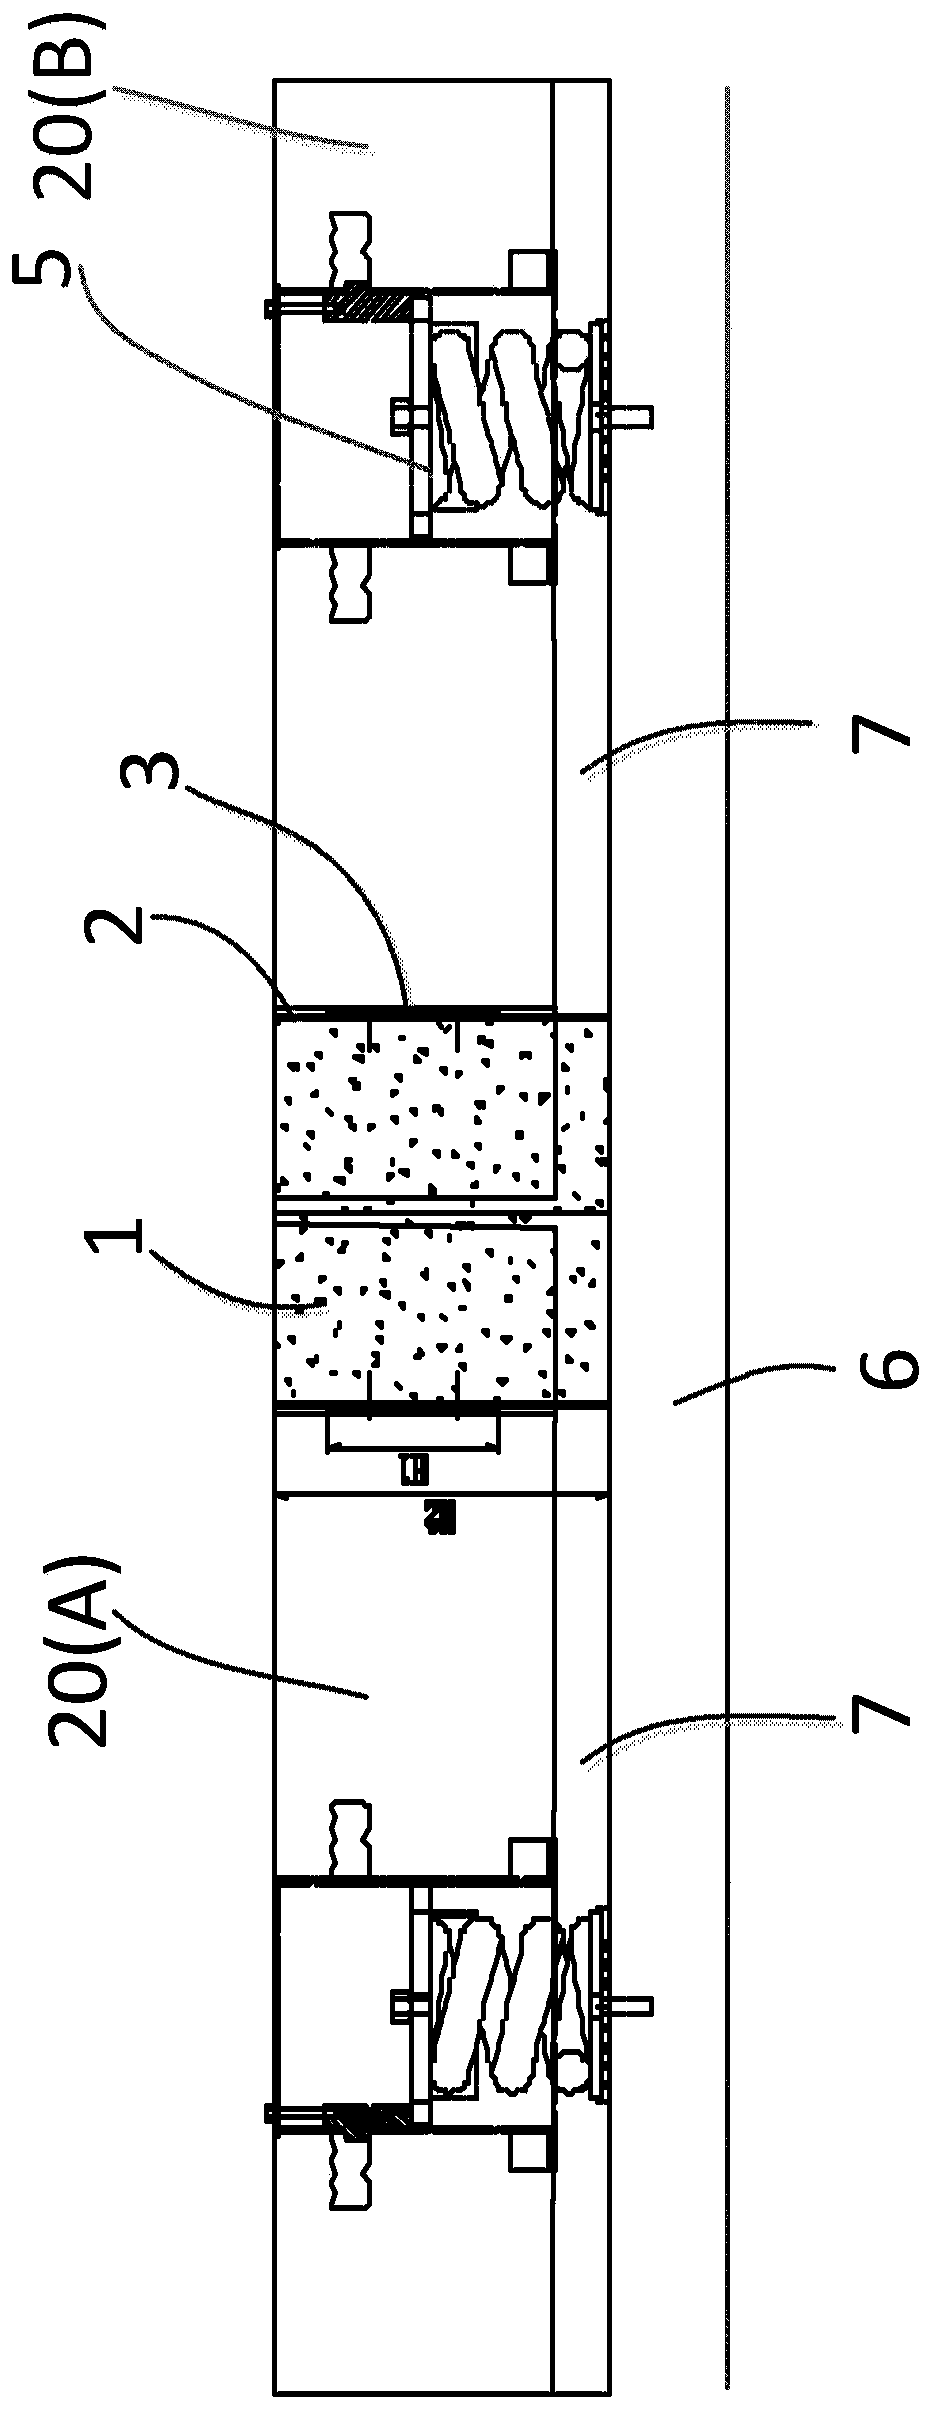 Floating slab limiting device and floating track bed